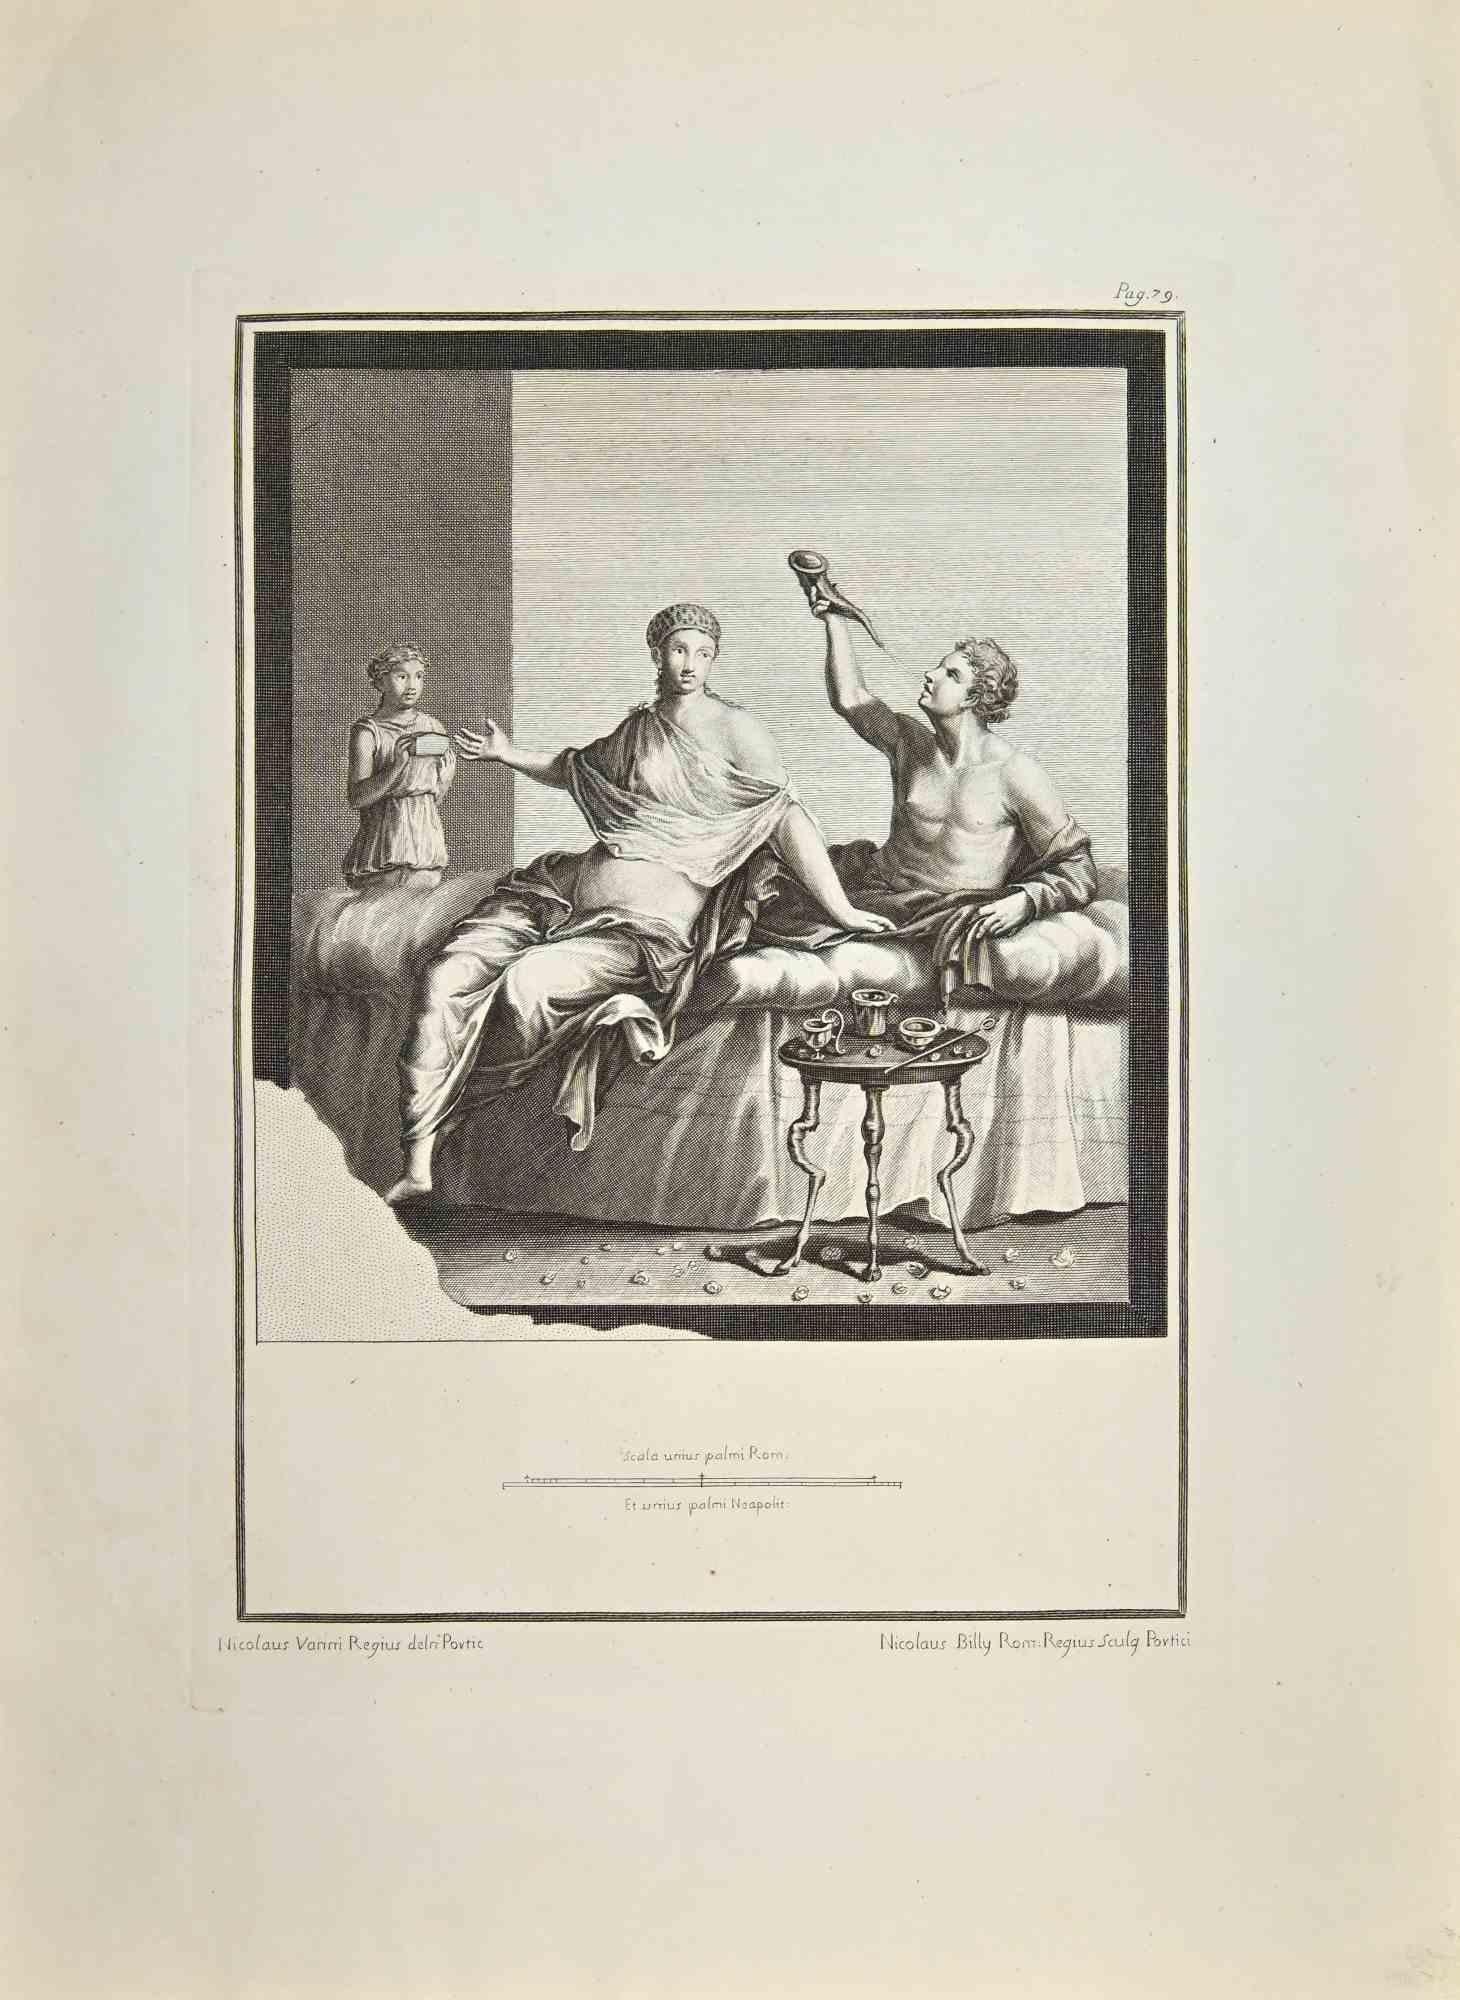 Leisure in Roman Time from "Antiquities of Herculaneum" is an etching on paper realized by Nicola Vanni and Nicola Billy in the 18th Century.

Signed on the plate.

Good conditions with some folding and foxing due to the time.

The etching belongs